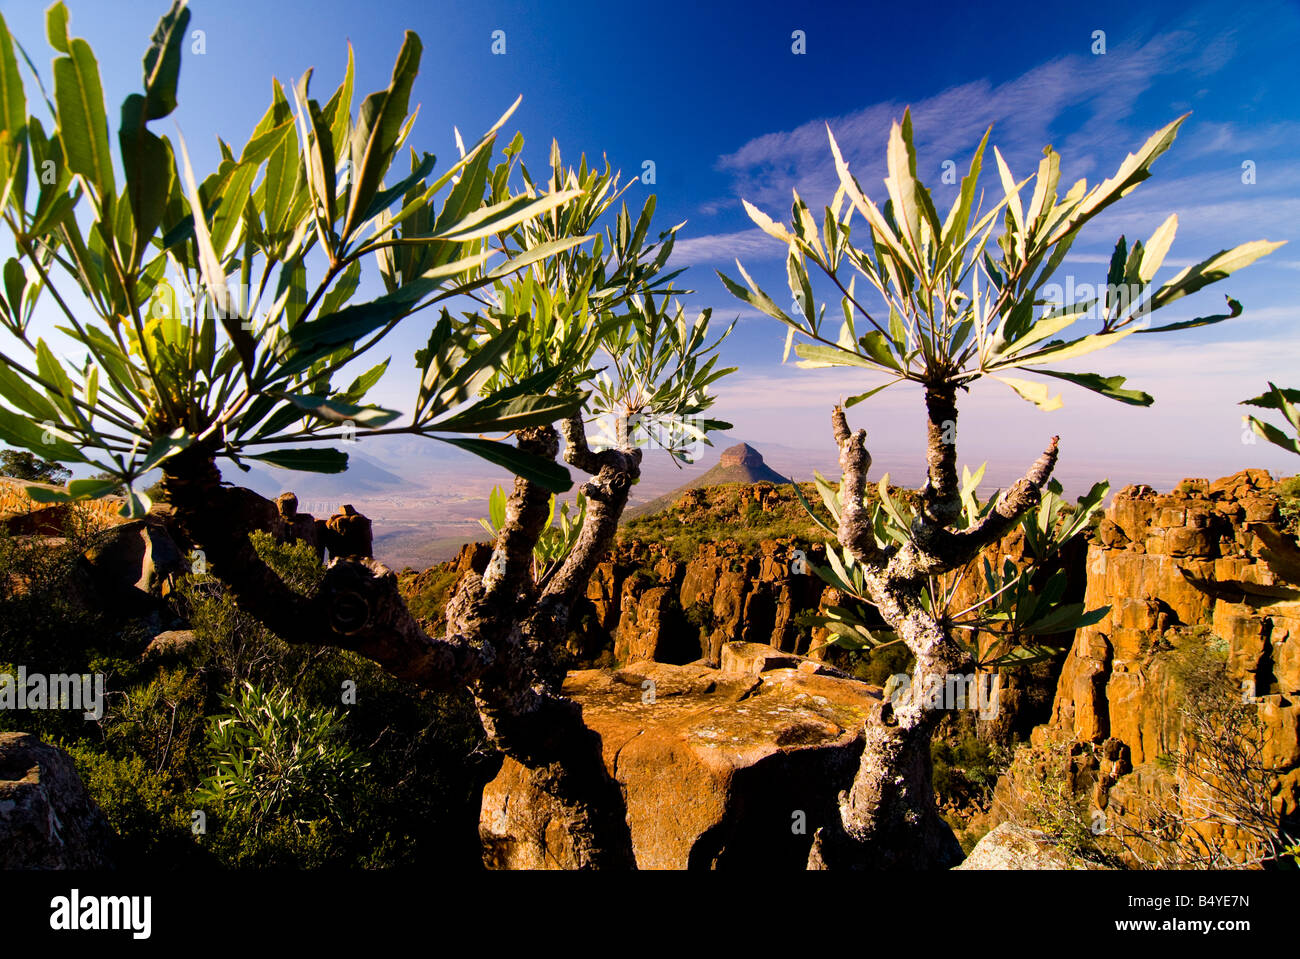 Valley of Desolation, Graaf Reinet, Eastern Cape, South Africa Stock Photo